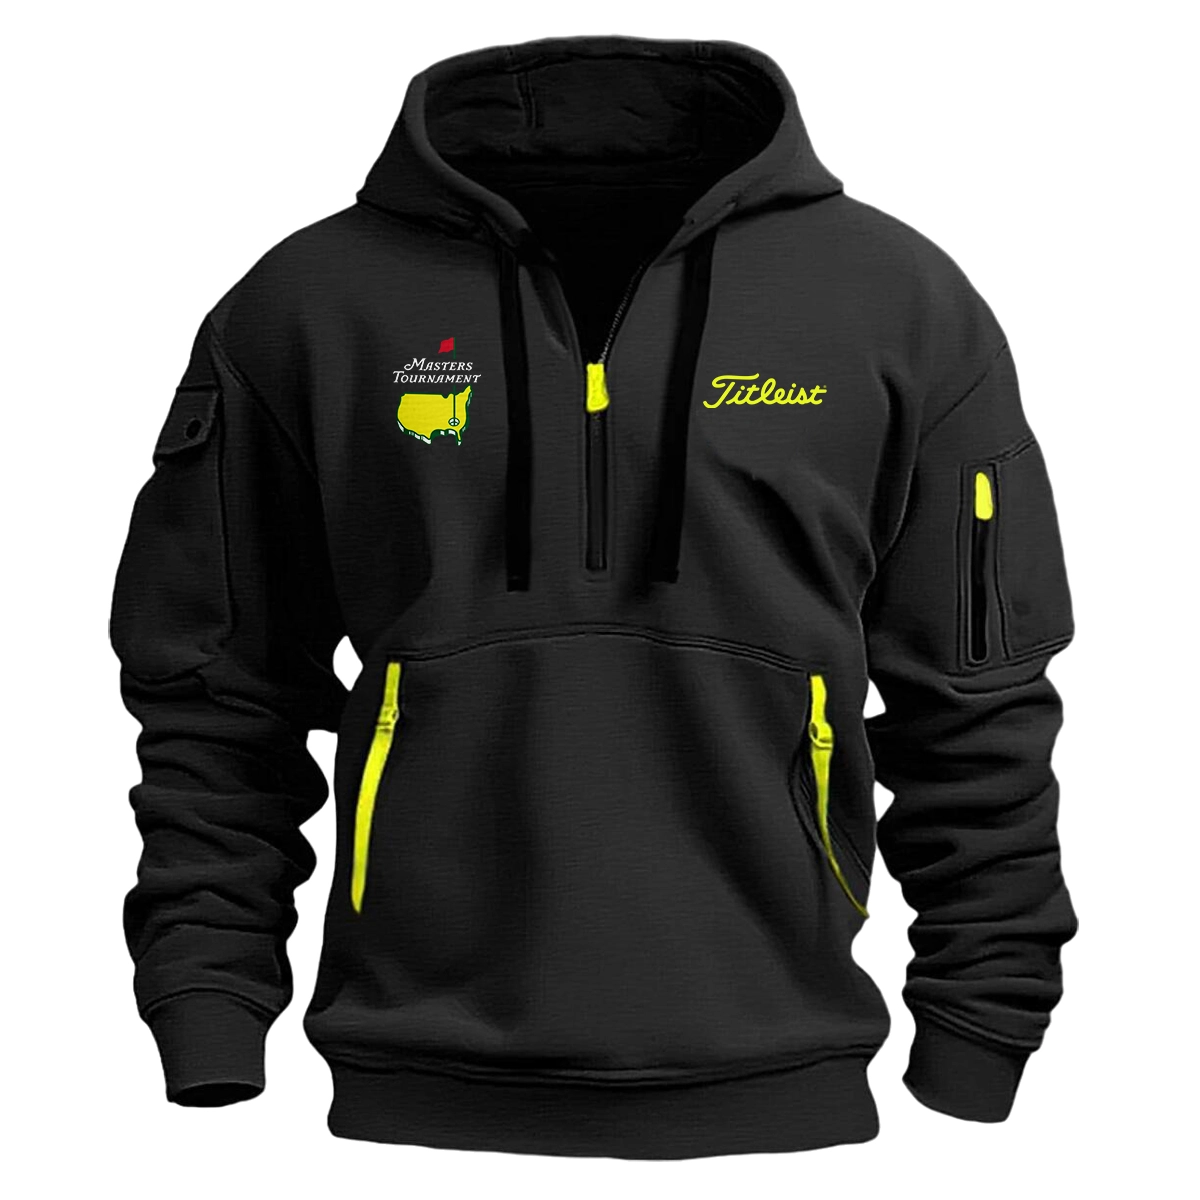 Titleist Fashion Hoodie Half Zipper Masters Tournament Gift For Fans For Father Husband